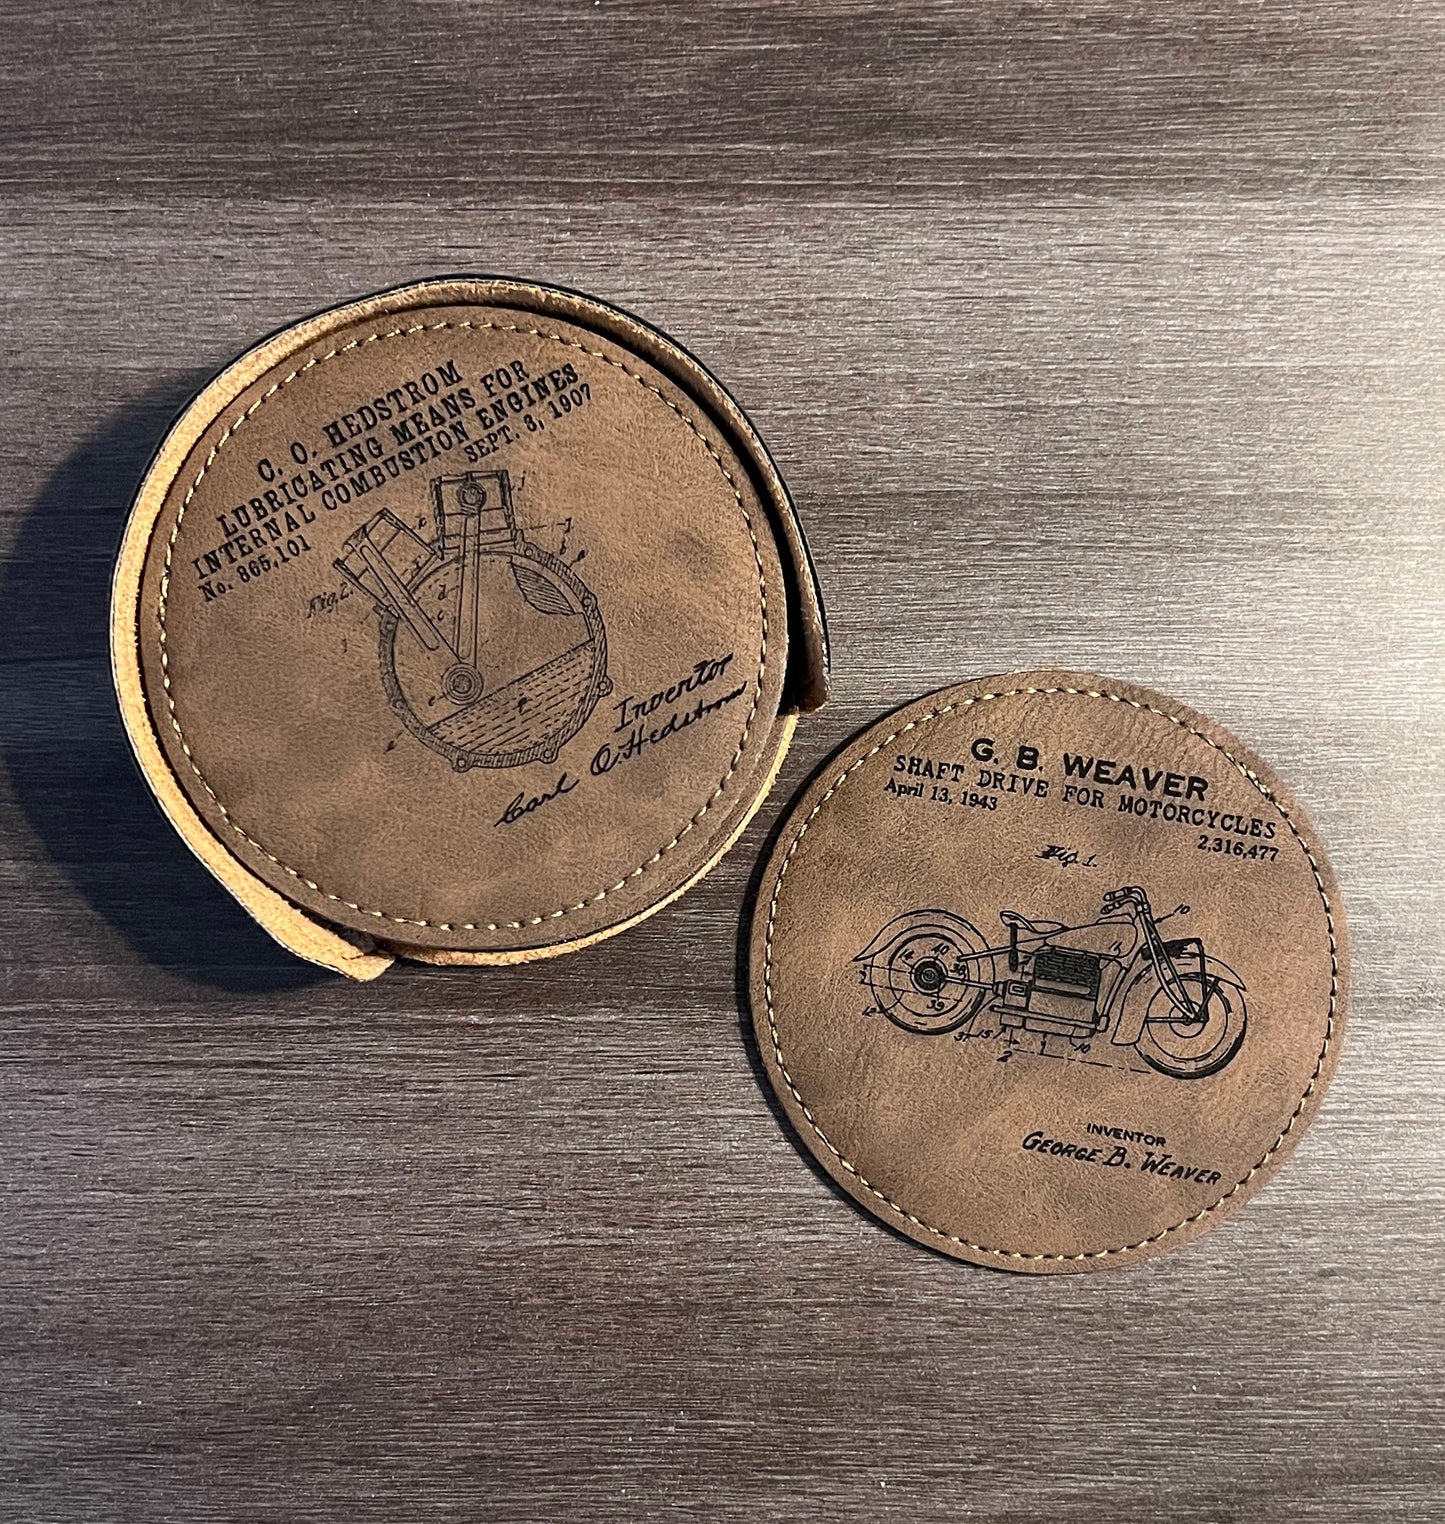 Indian Motorcycle Patent Coasters // Set of 6 Coasters // Leather Coasters // Indian Motorcycle // Motorcycle Decor